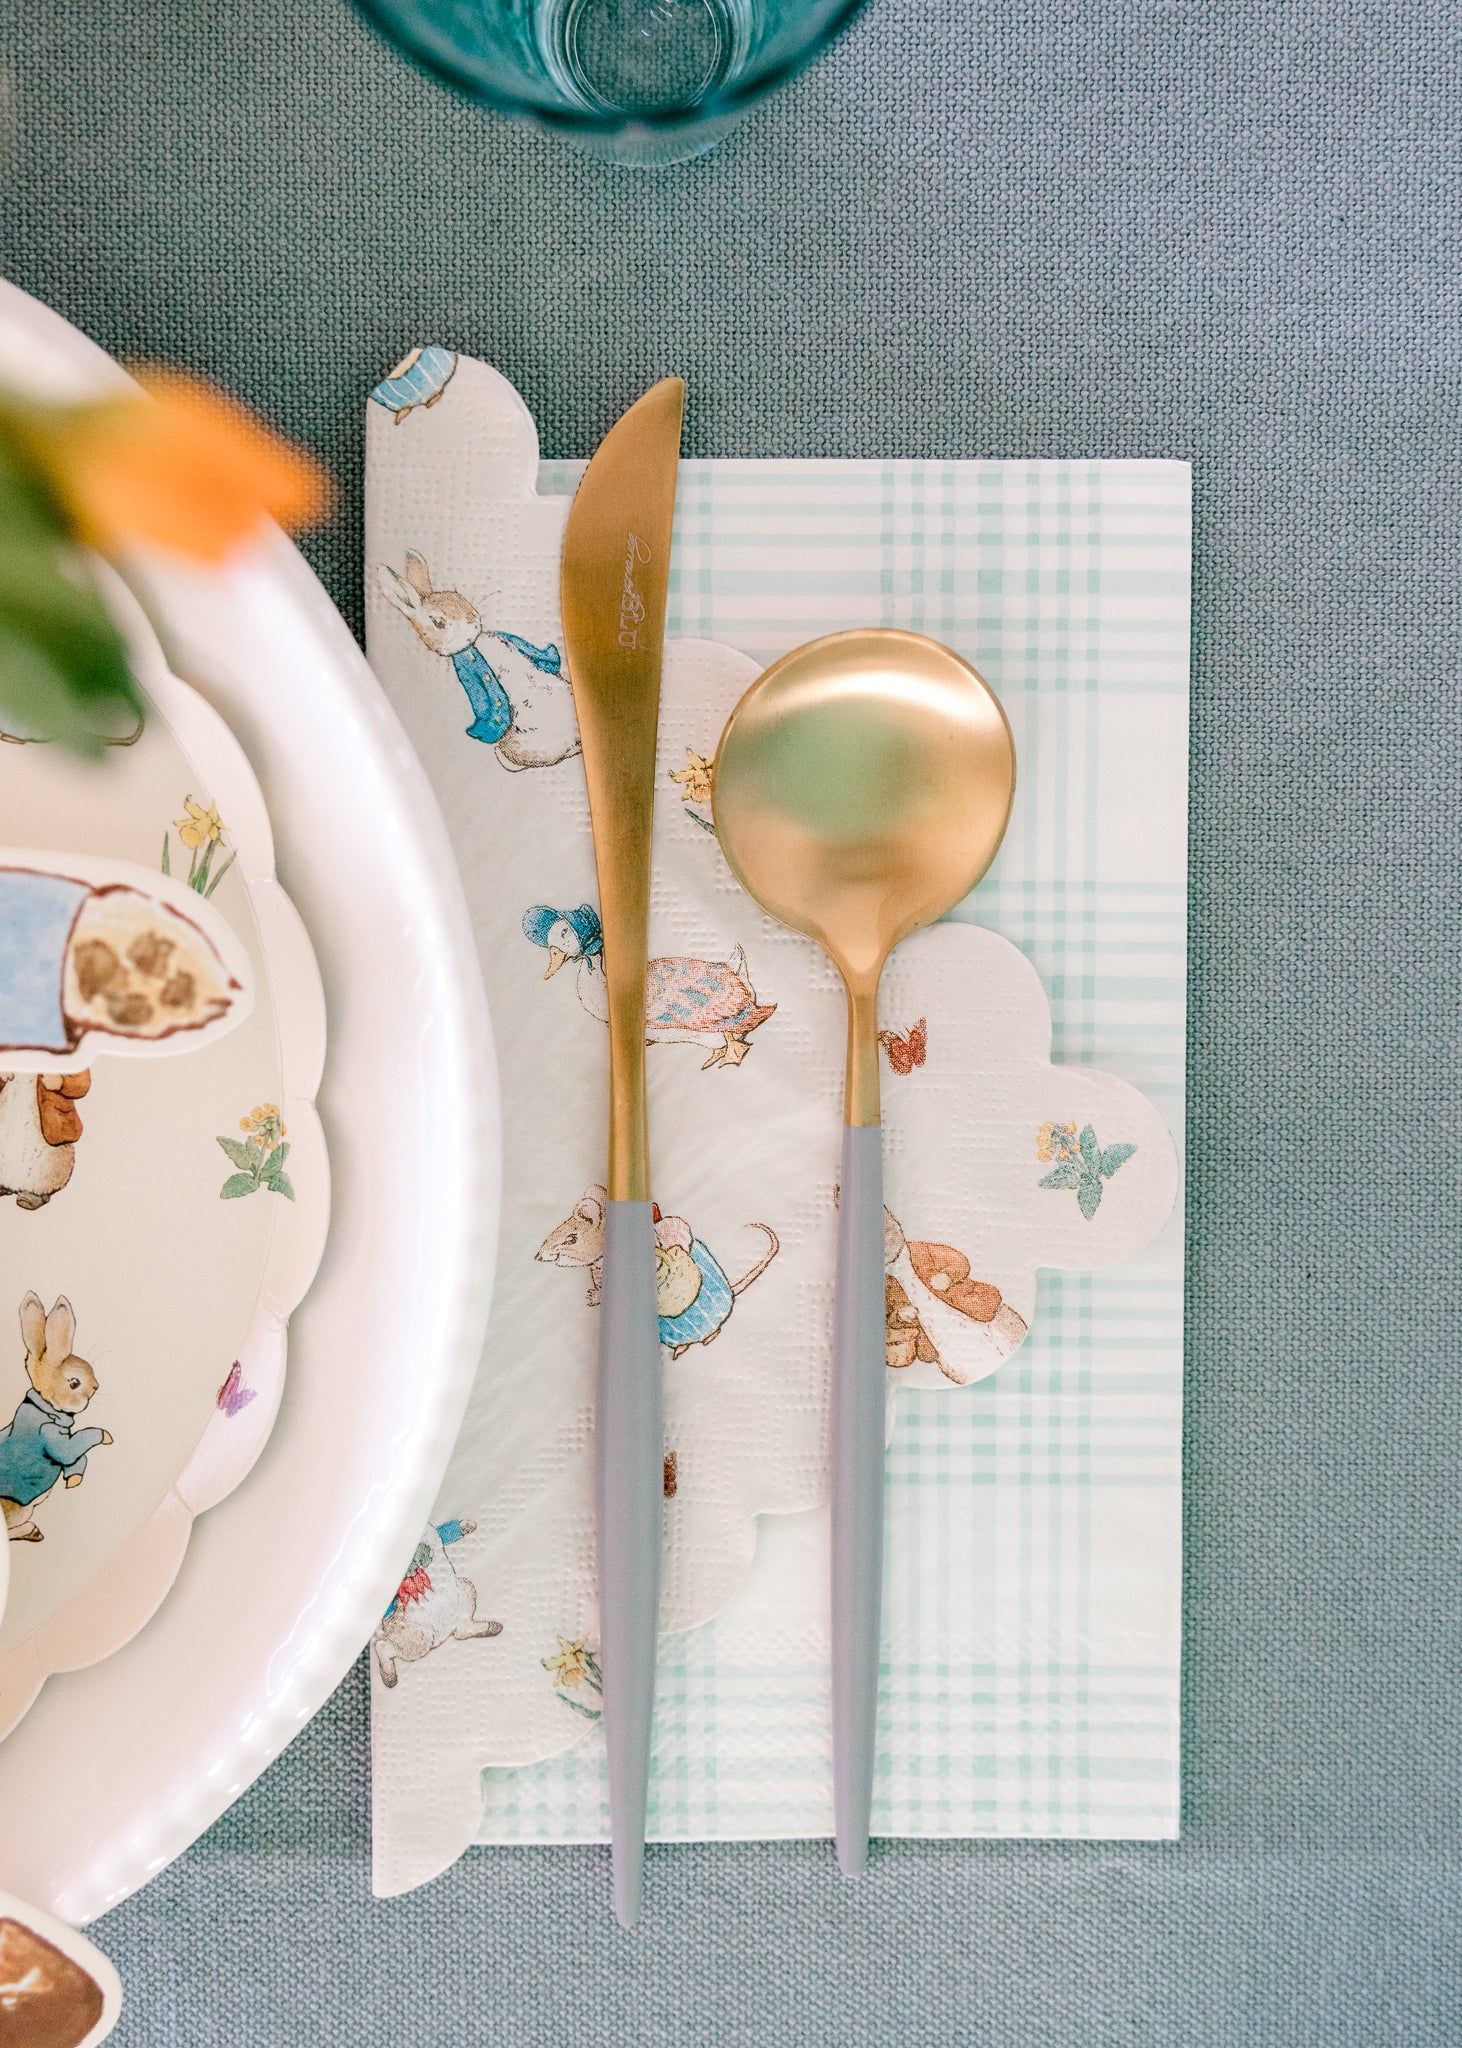 Peter Rabbit napkins and paper plates